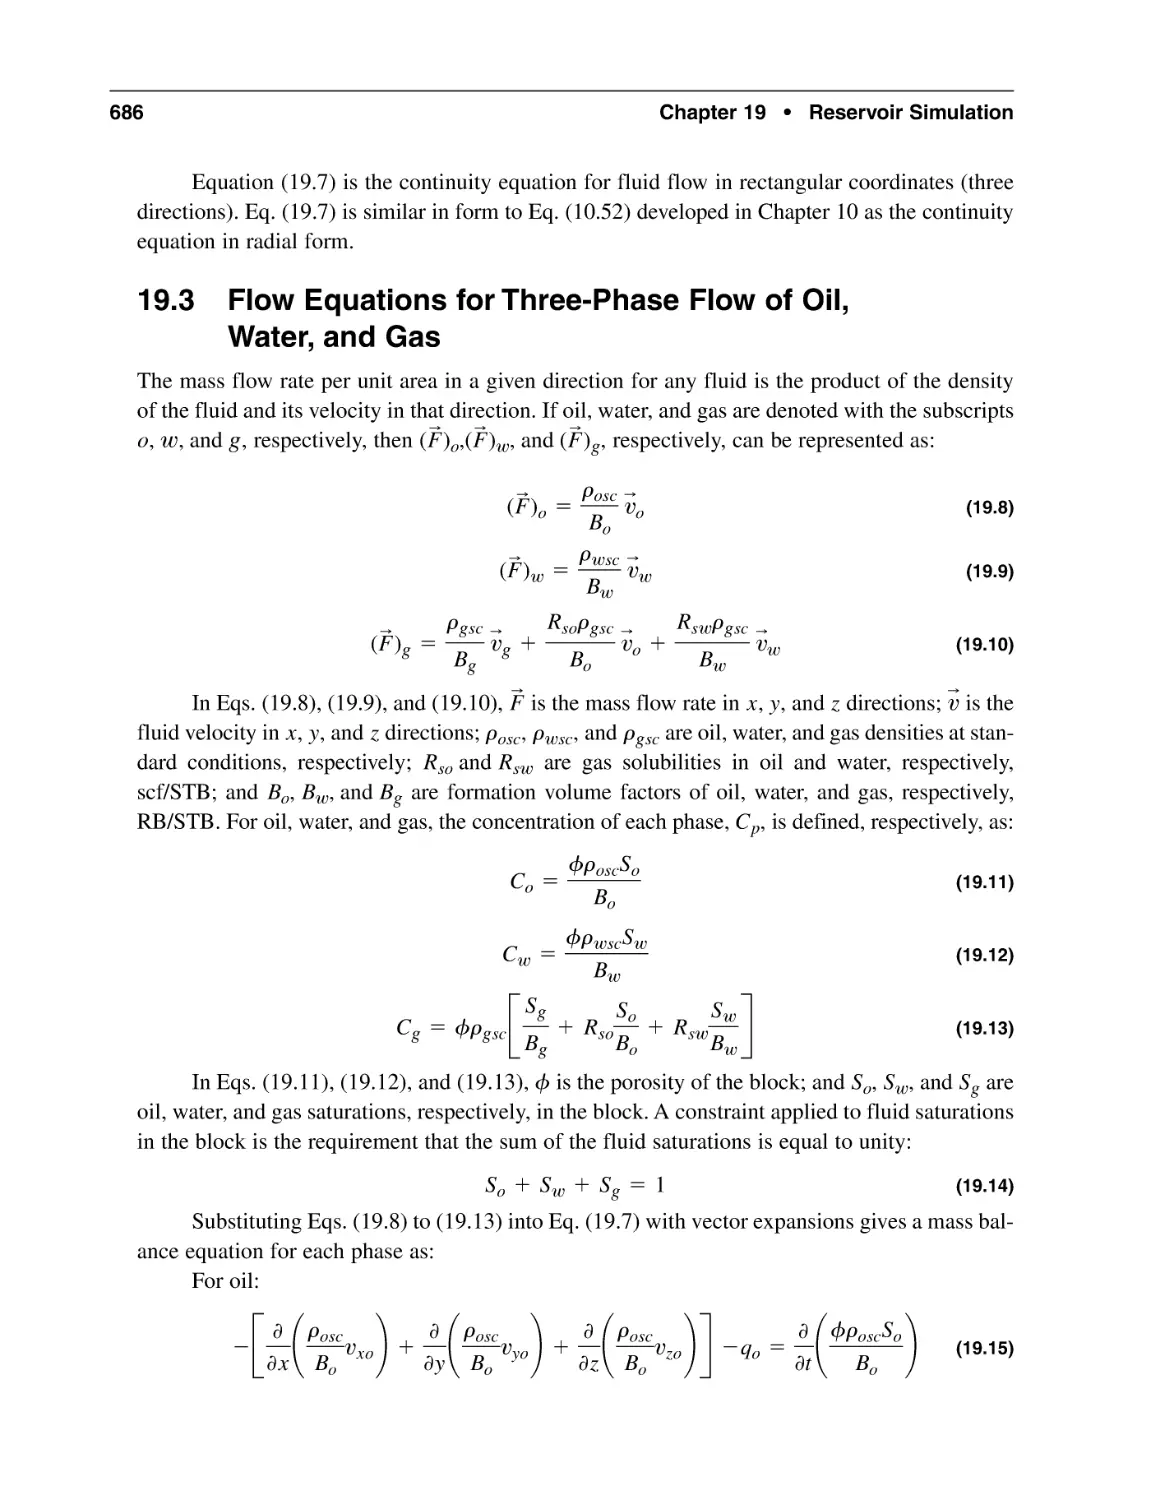 19.3 Flow Equations for Three-Phase Flow of Oil,Water, and Gas